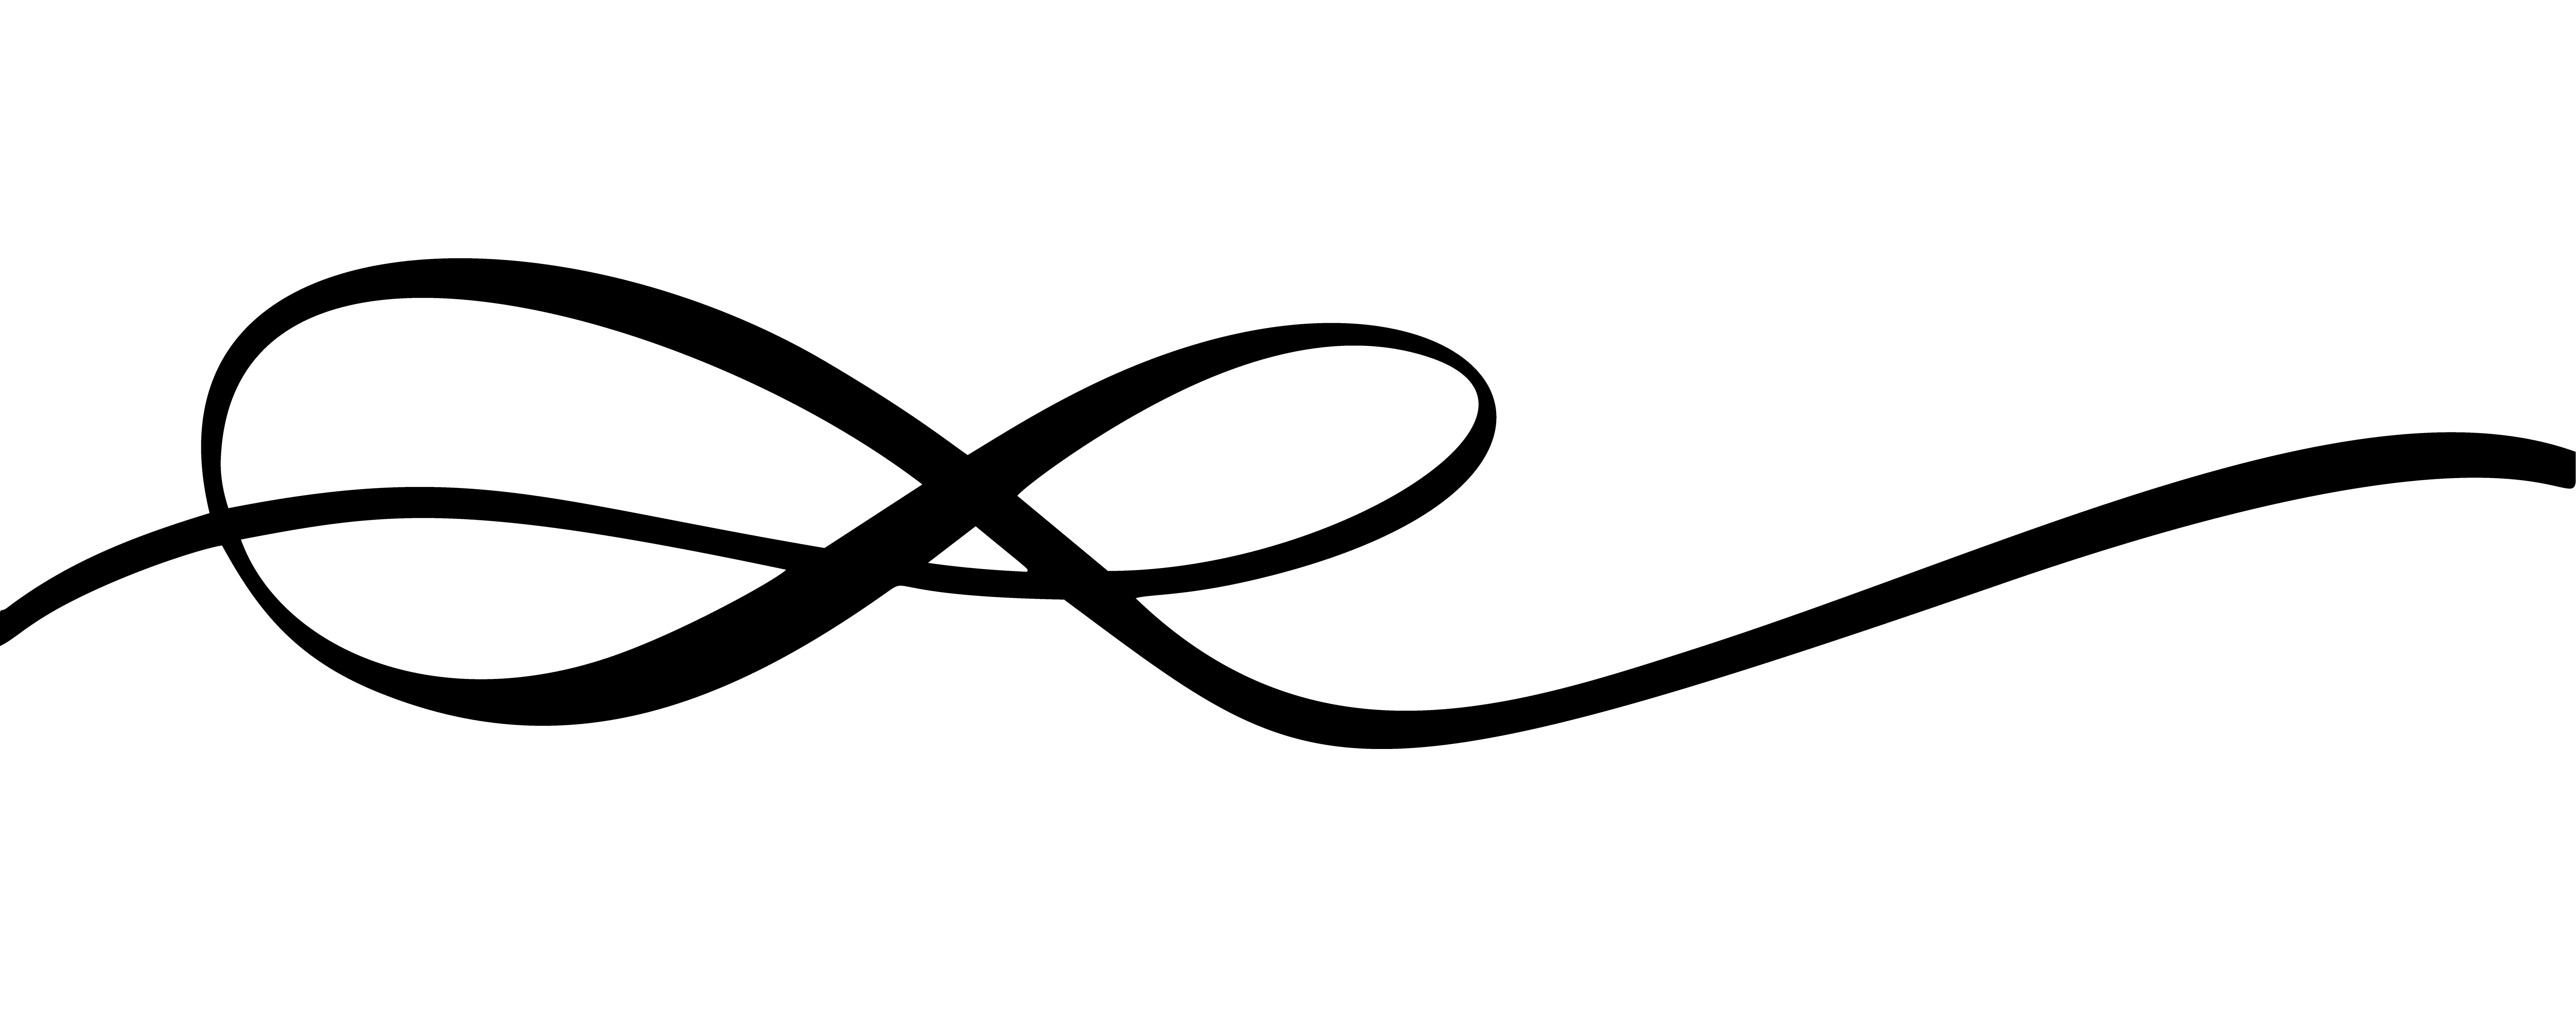 8. Rainbow Infinity Tattoo with Names - wide 8